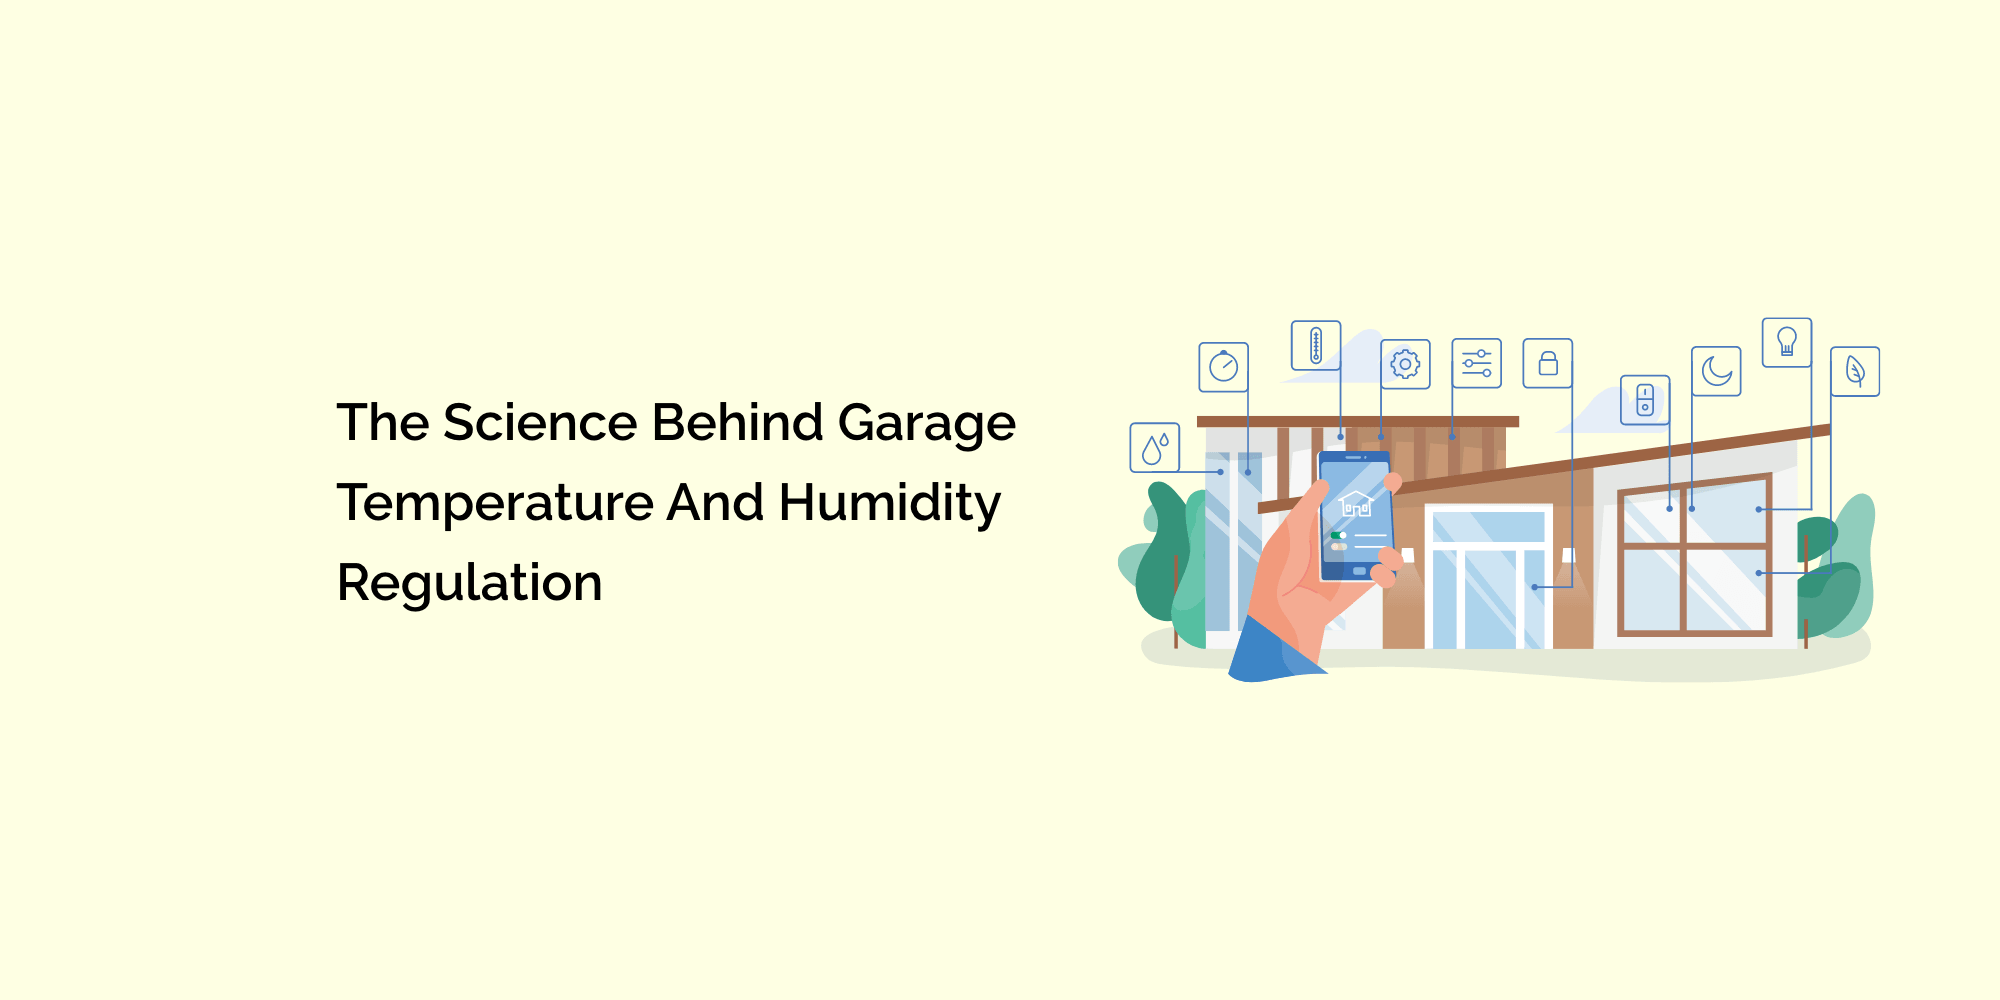 The Science Behind Garage Temperature and Humidity Regulation